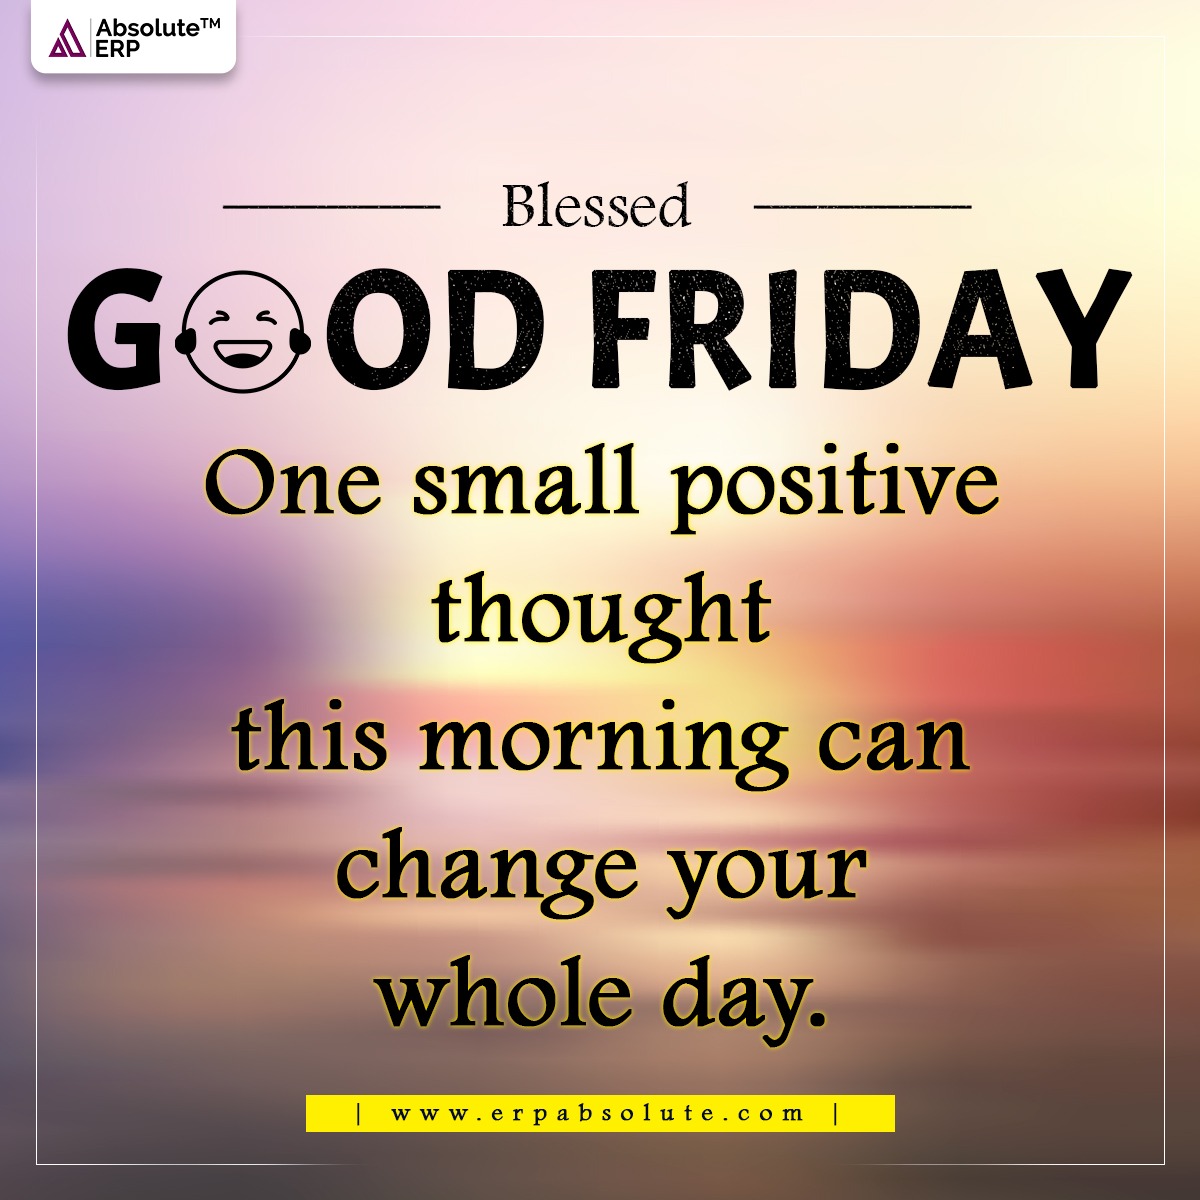 Make your Friday special with Absolute ERP and transform your business.

#absoluteerp #goodfriday #FridayInspiration #Friday #fridayvibe #erp #happyfriday #FridayFunday #erpsoftware #Fridaythoughts #fridayspecial #FridayGoals #manufacturingerp #fridaymotivation #goodvibes